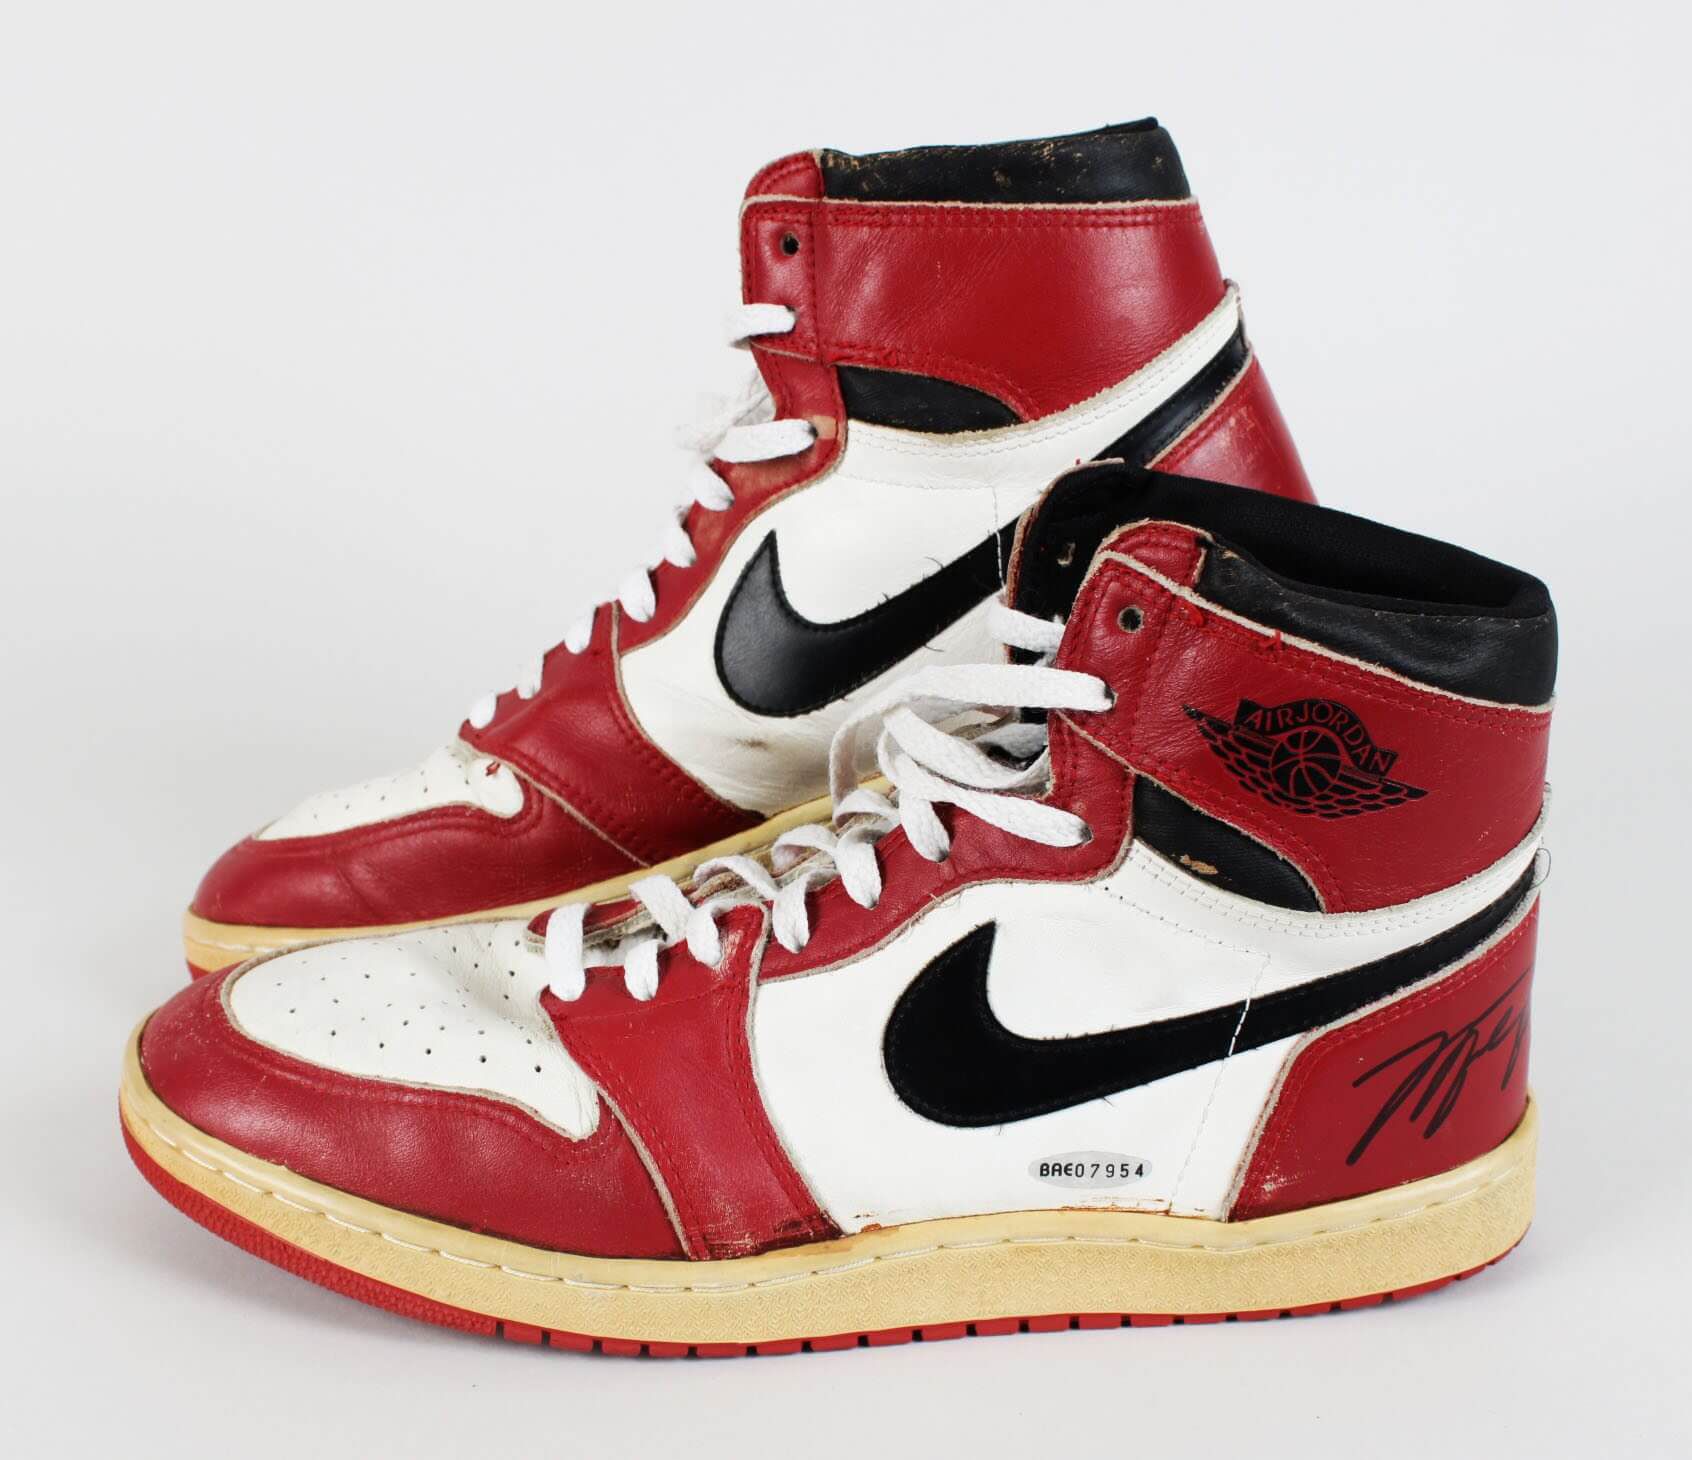 22 Most Expensive Shoes in the World of All Time